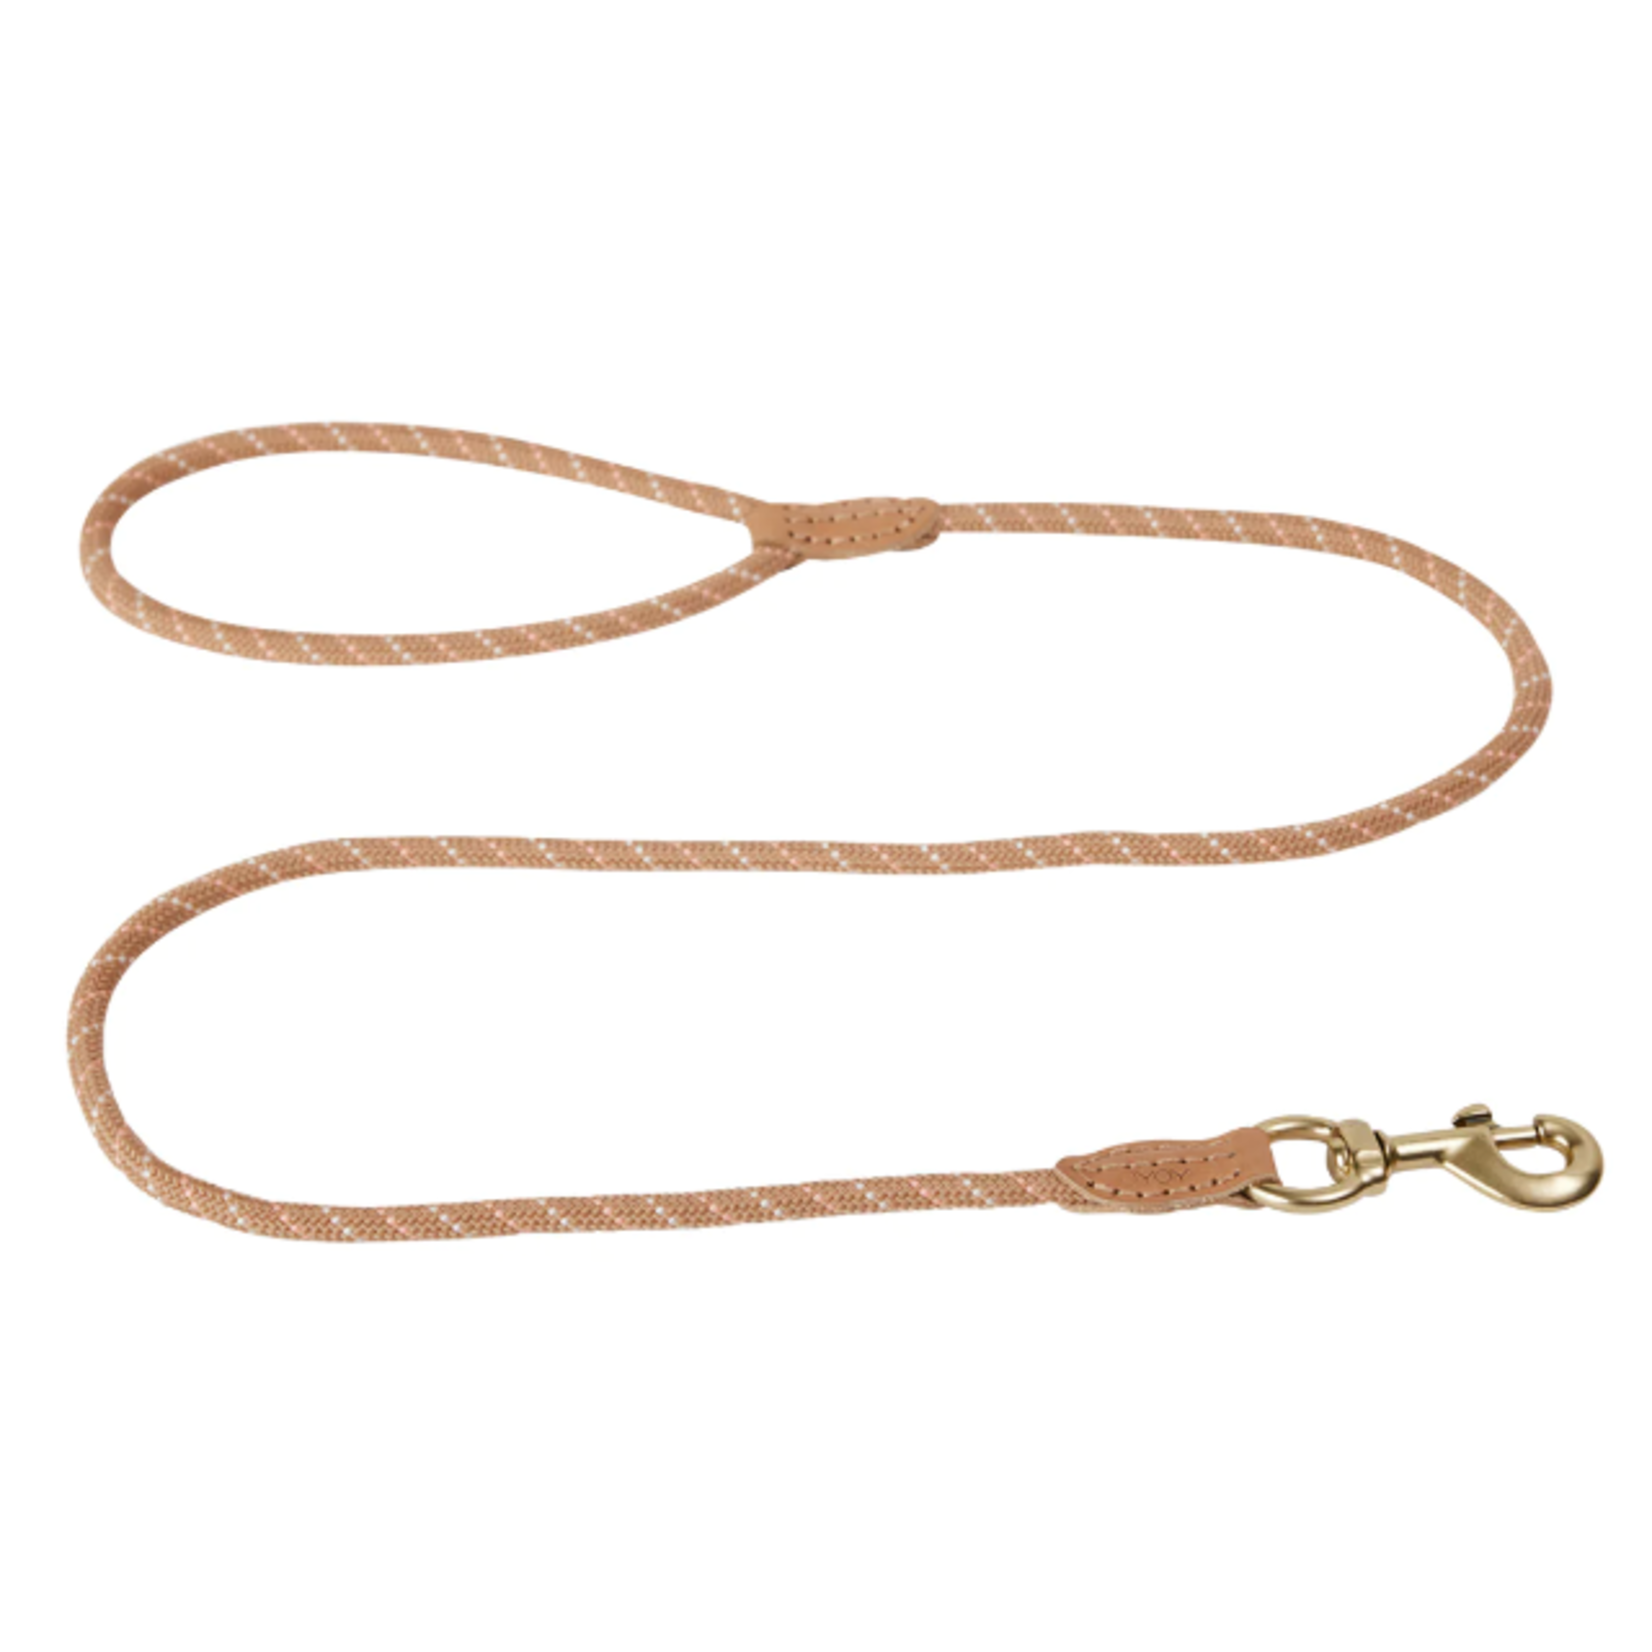 Purpers Exclusive Perry dog leash caramel 164 cm